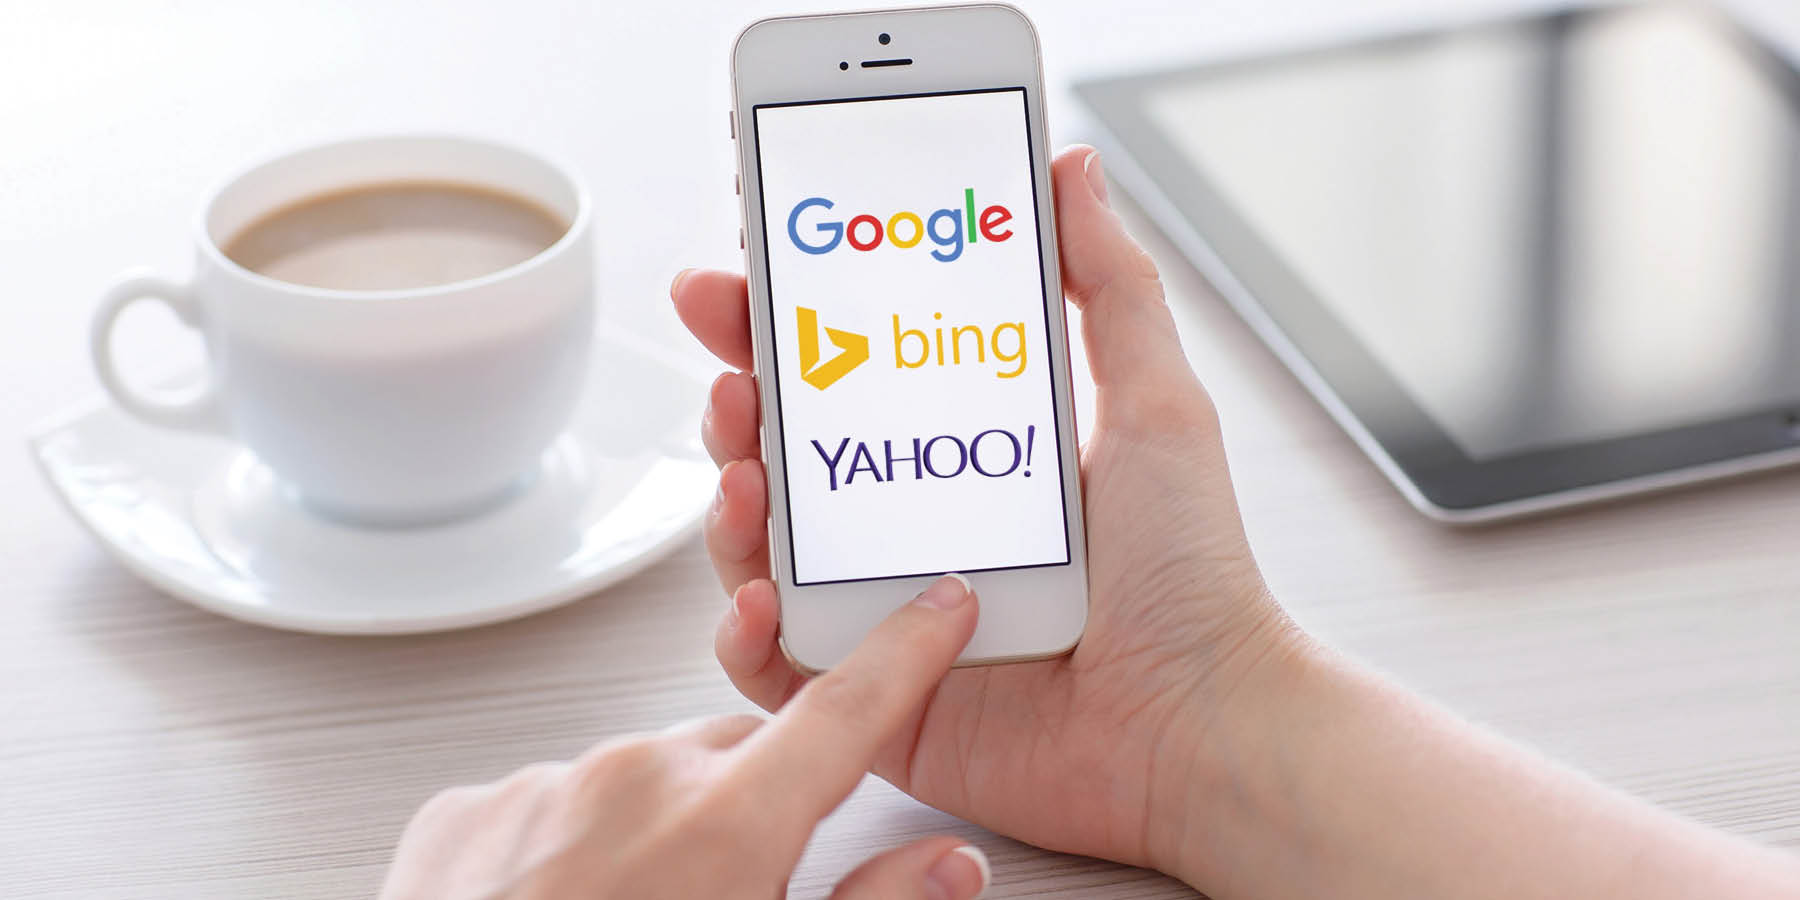 female-hands-holding-iphone-showing-3-main-search-engines-google-bing-and-yahoo